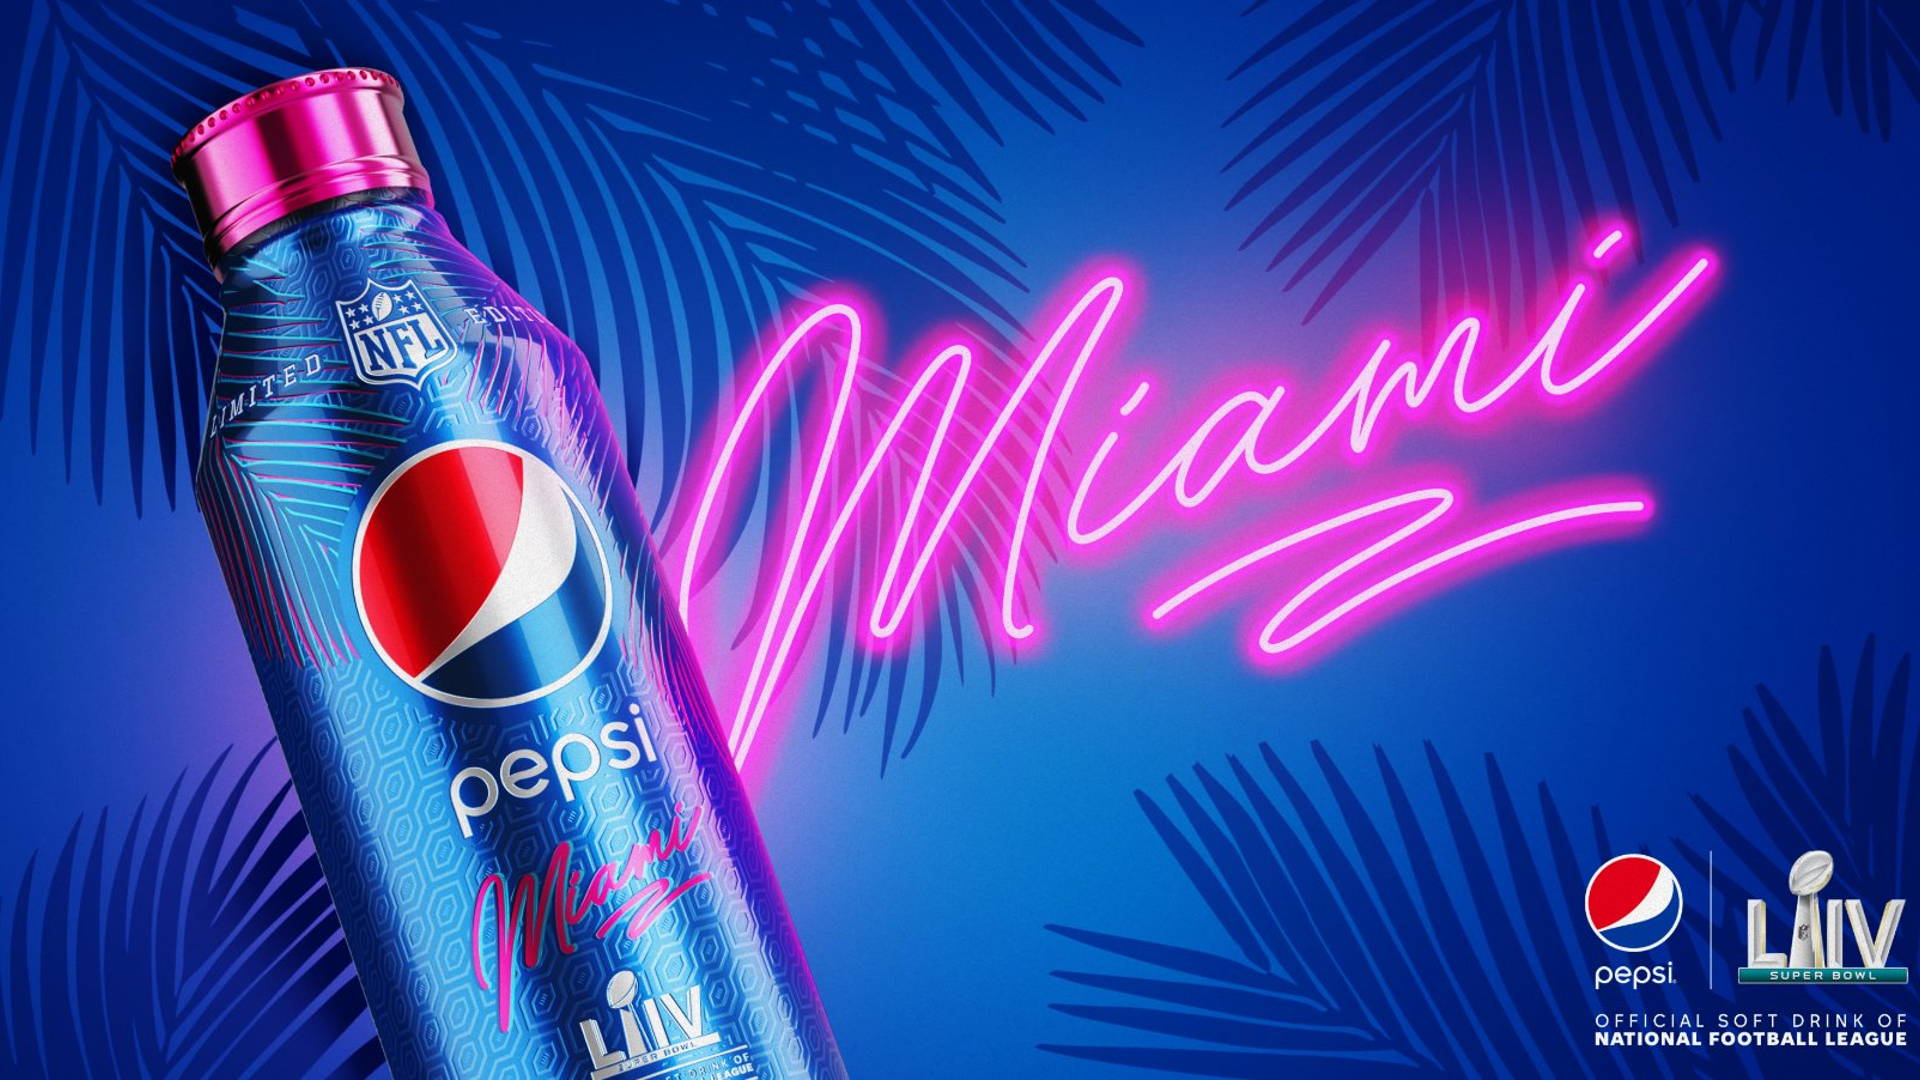 Pepsi Releases LimitedEdition Bottle With Some Miami Flavor For Super